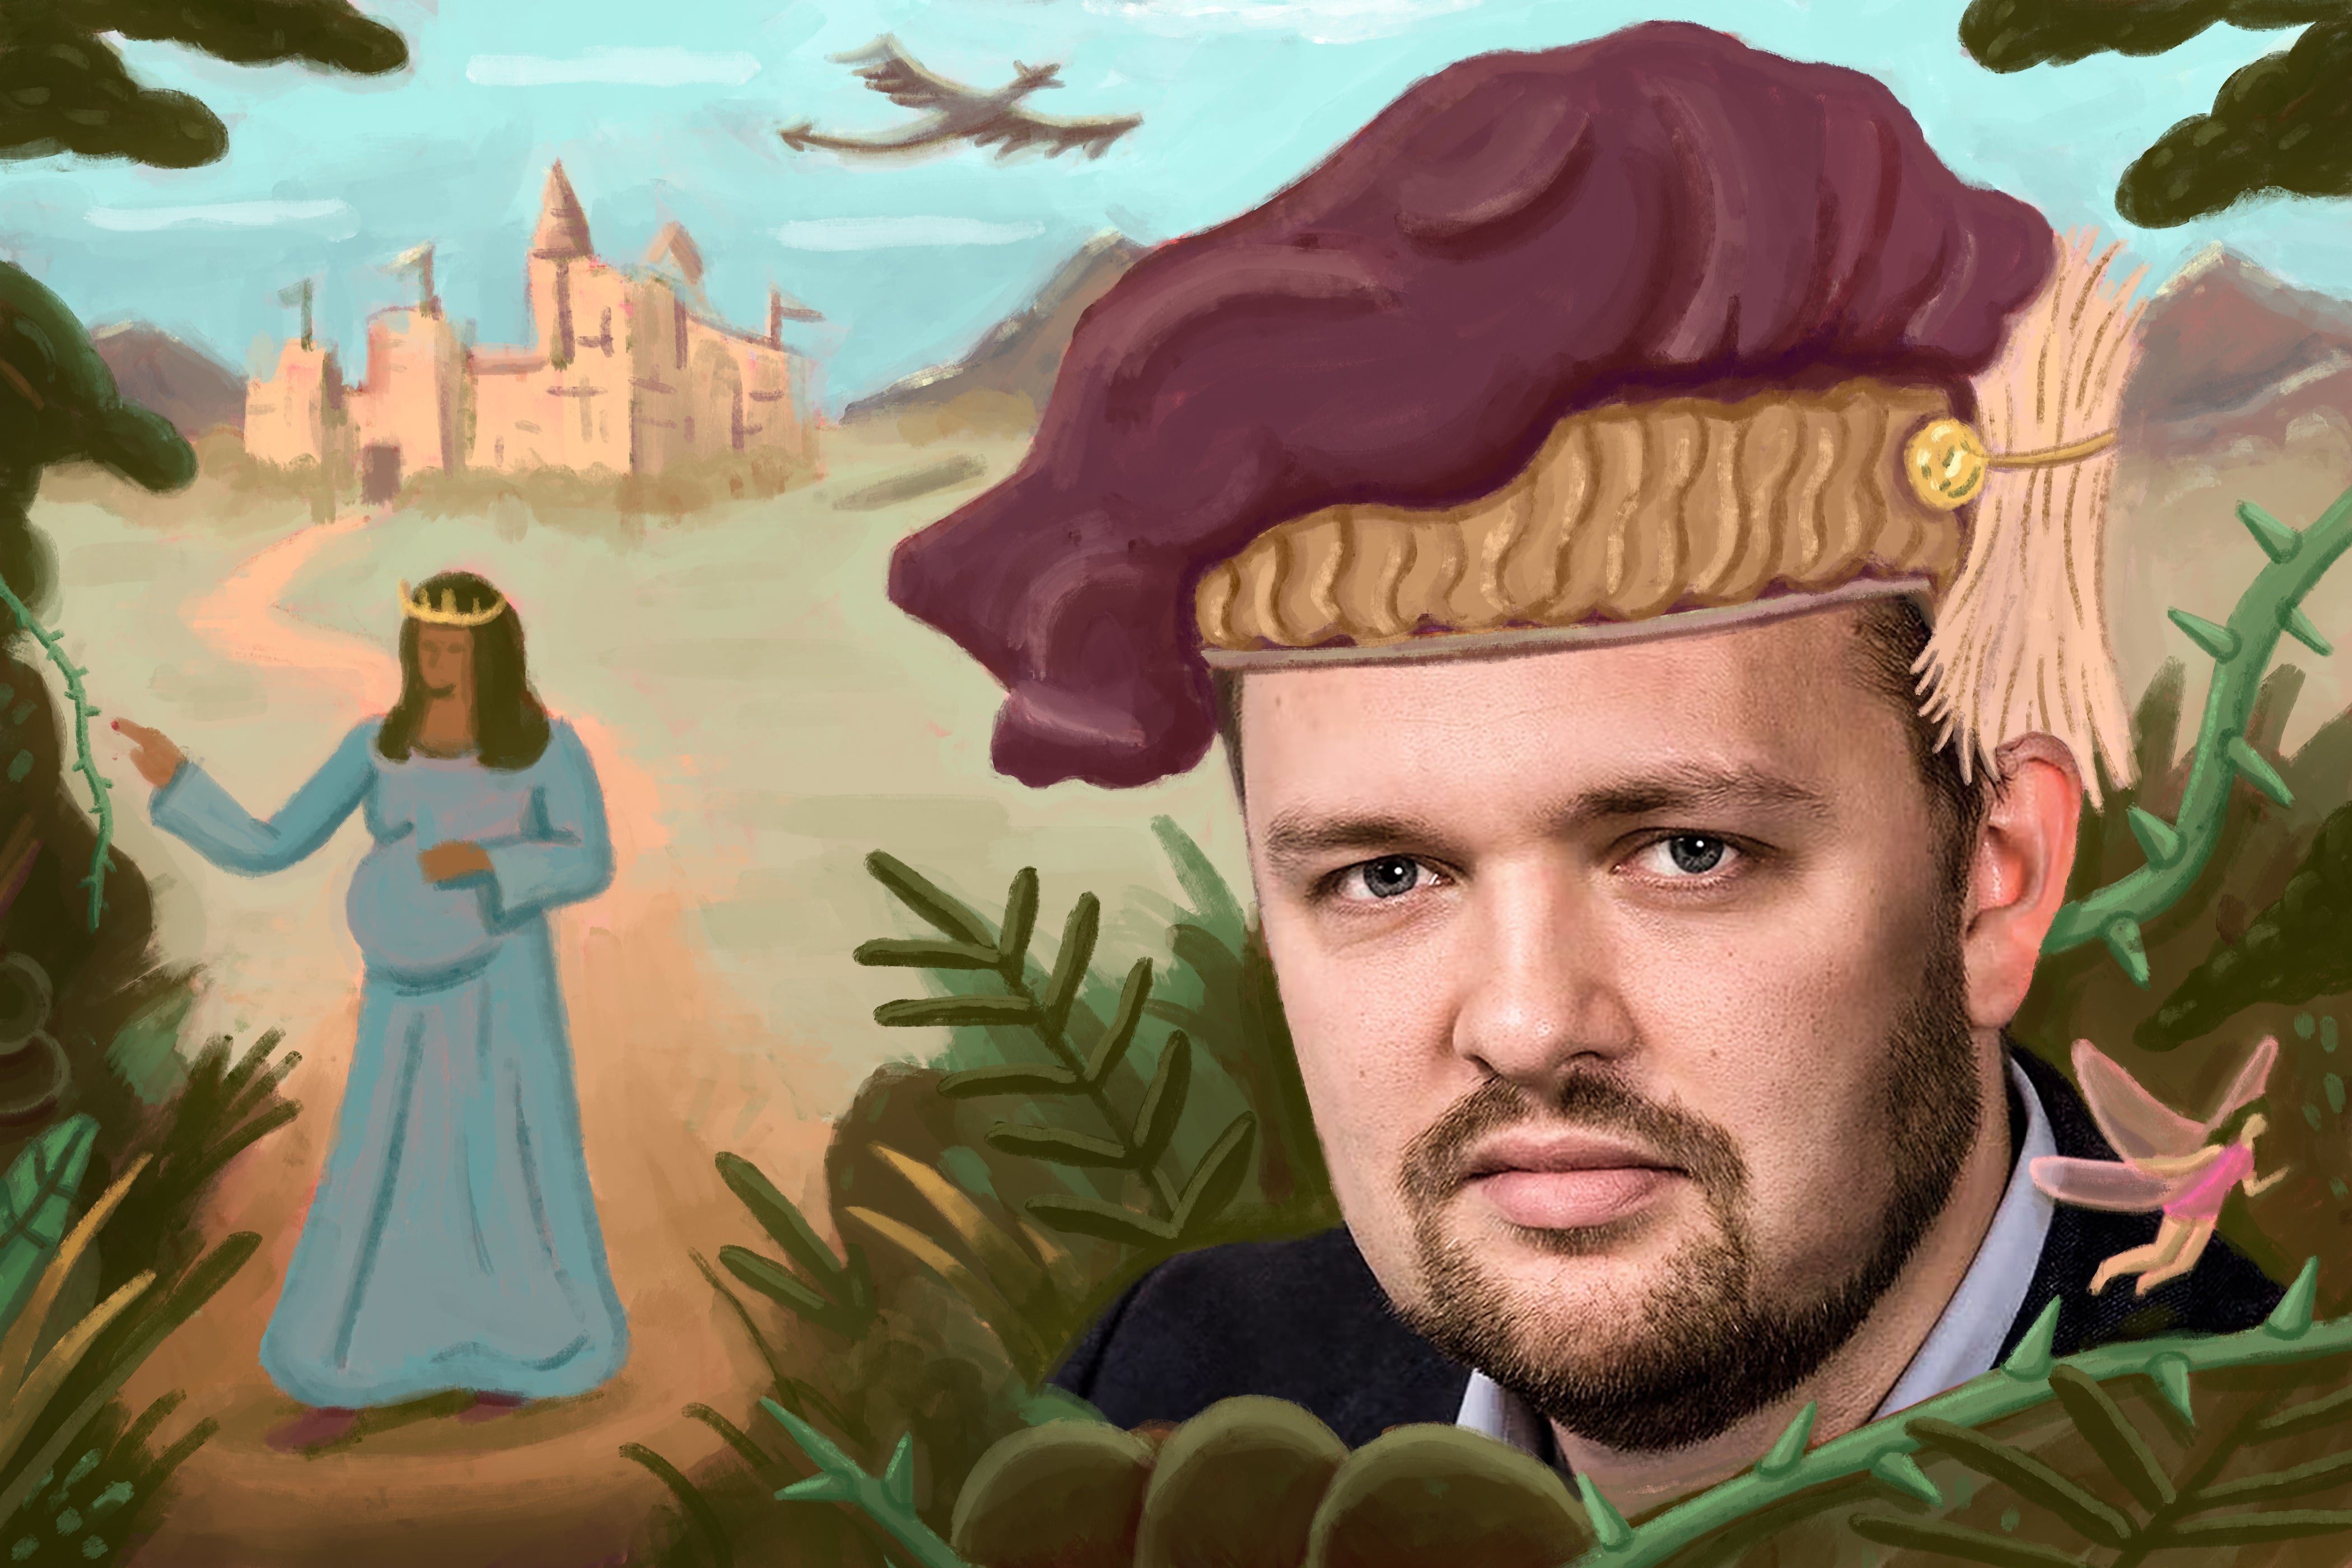 Ross Douthat in a magical wood, with fairies, dragons, and a princess.